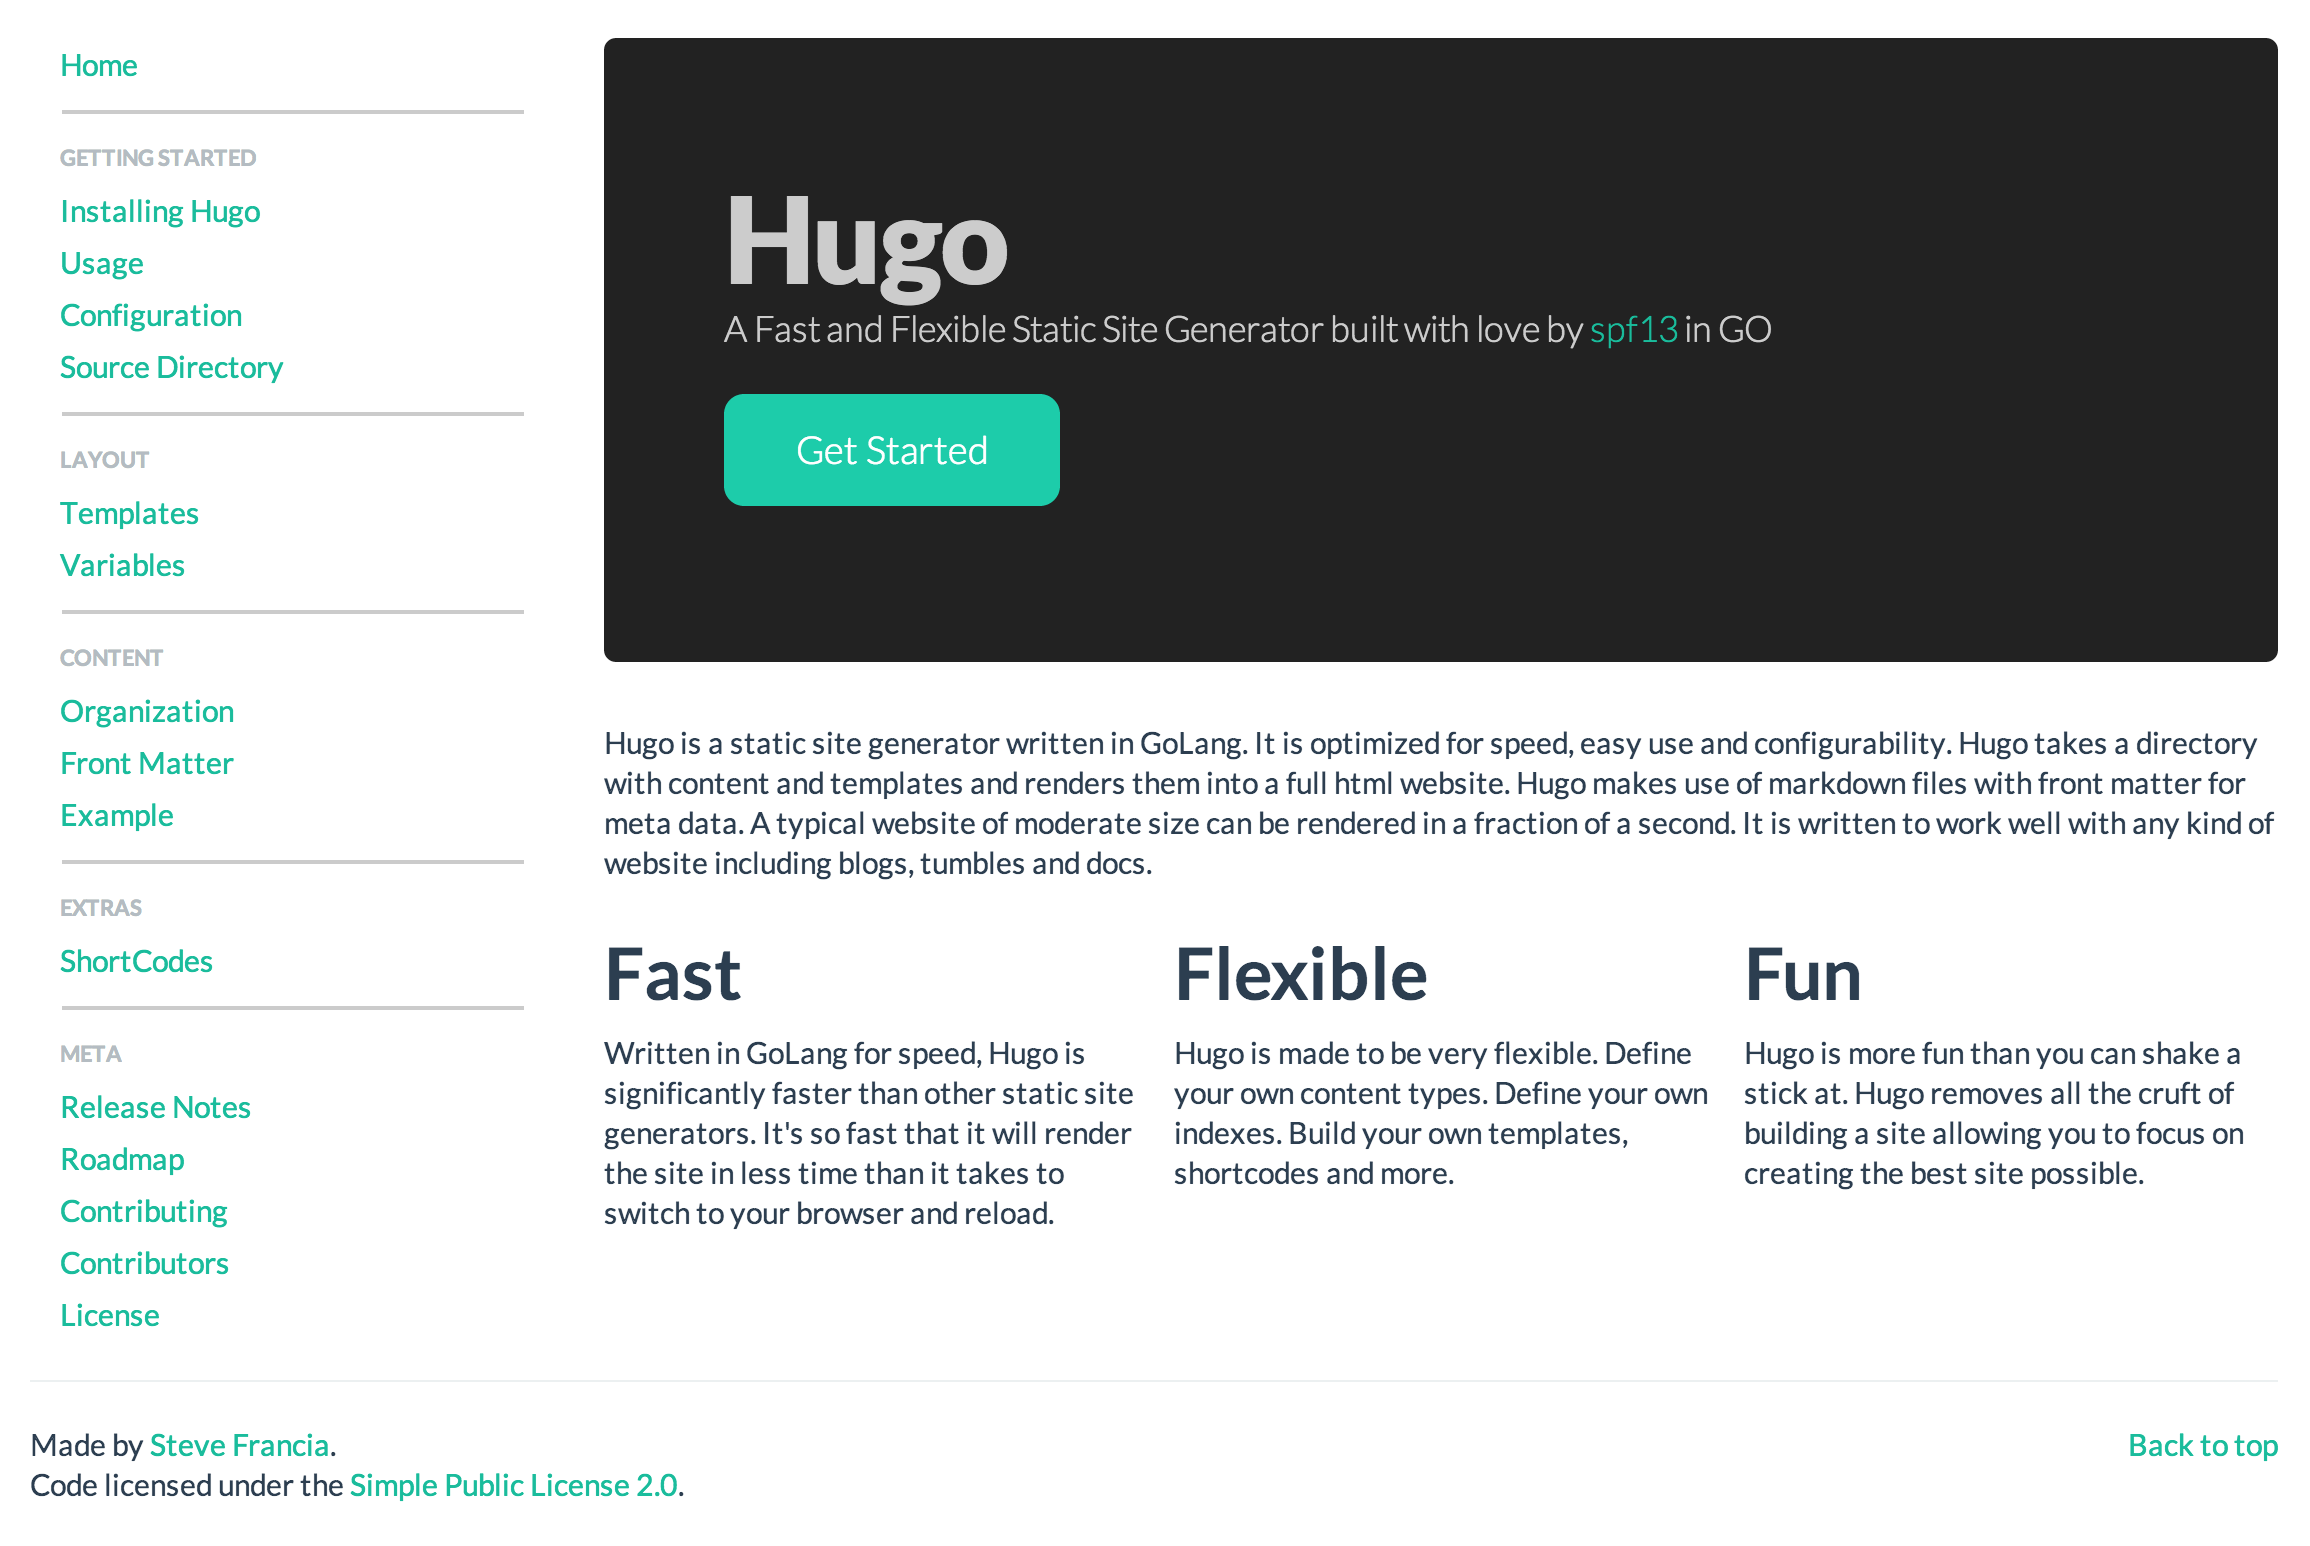 Hugo: A fast and flexible static site generator built in ... - 2310 x 1546 png 262kB